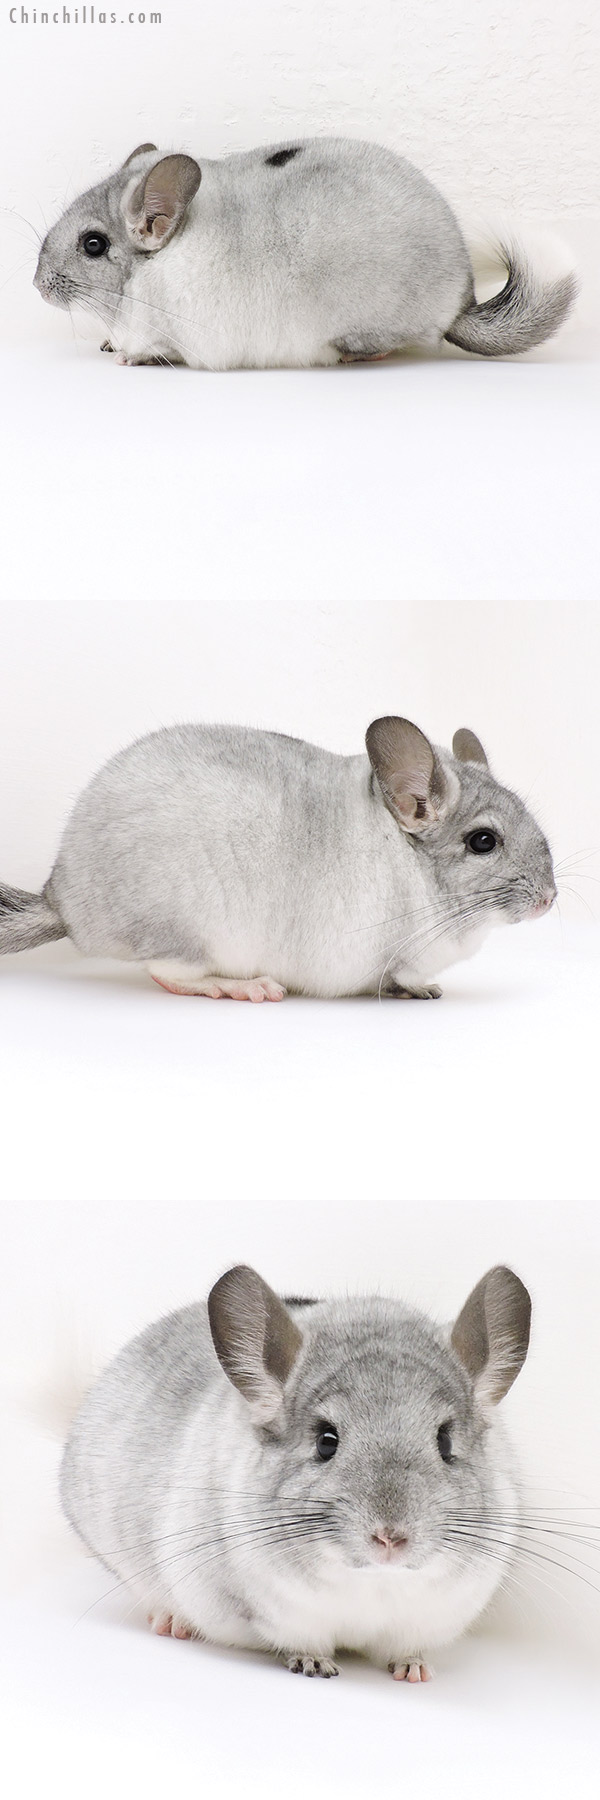 Chinchilla or related item offered for sale or export on Chinchillas.com - 17037 Premium Production Quality Silver Mosaic Female Chinchilla